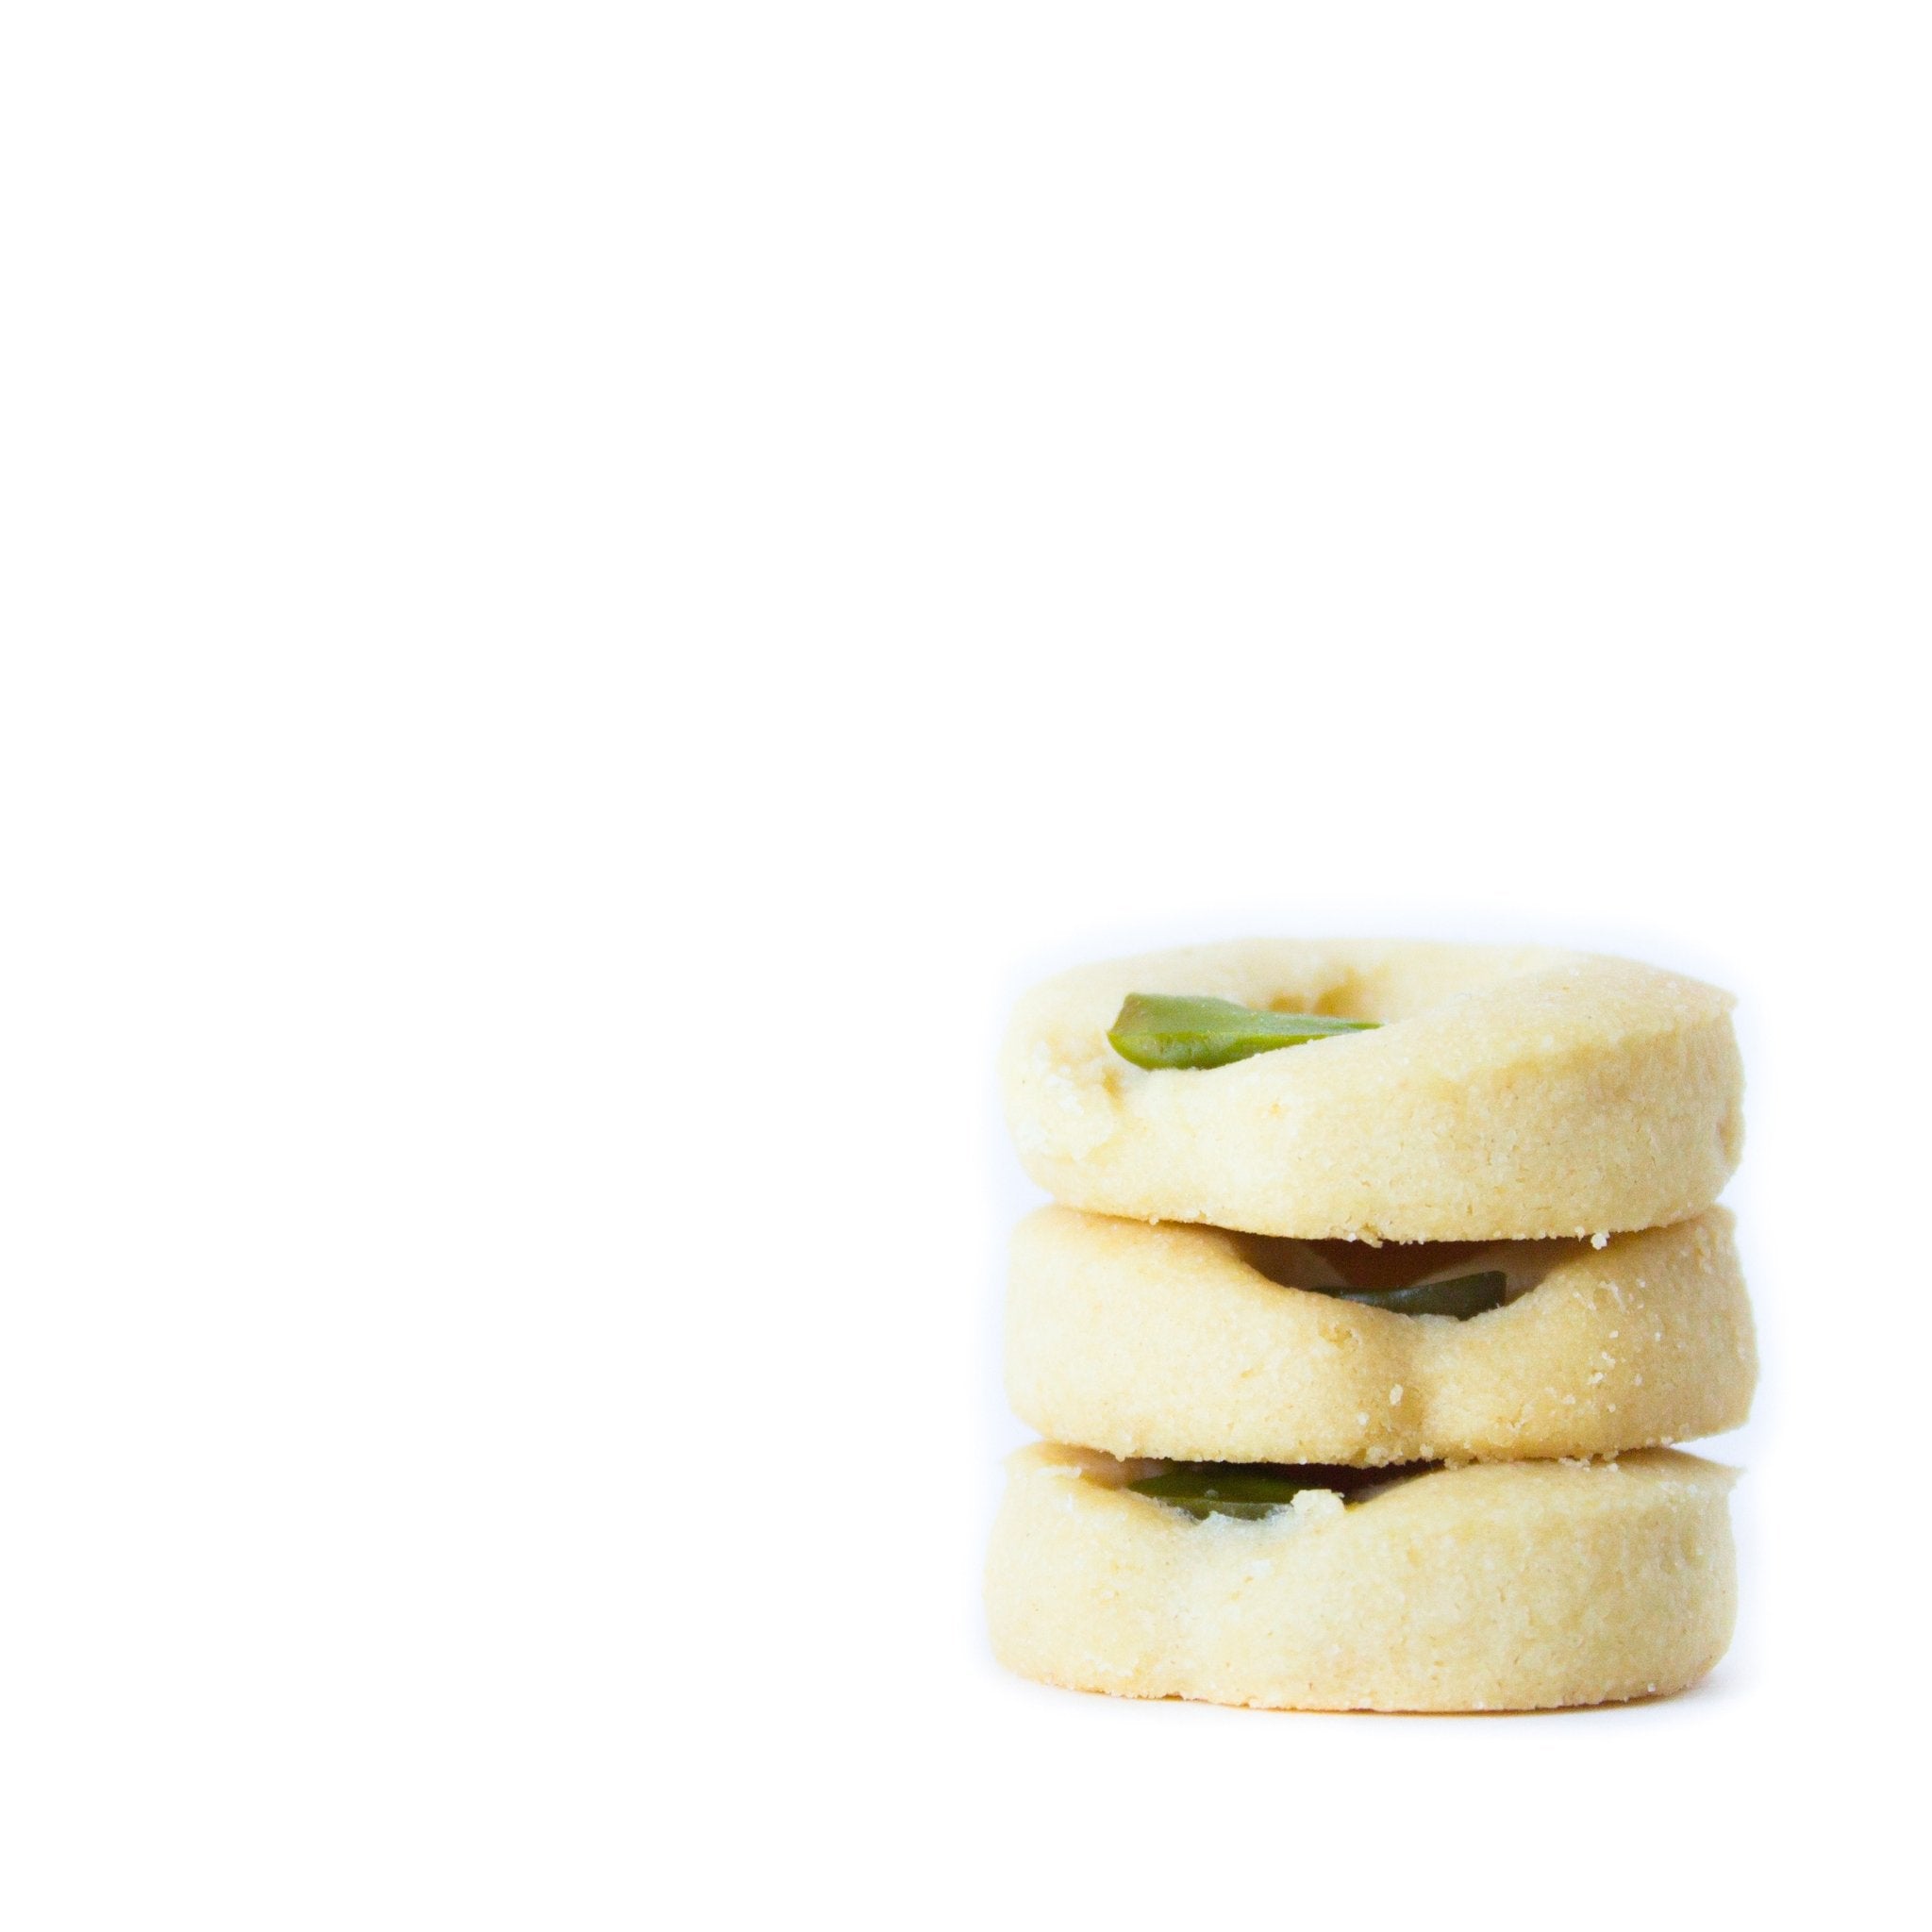 Traditional Graybeh (Middle Eastern Shortbread Cookie)